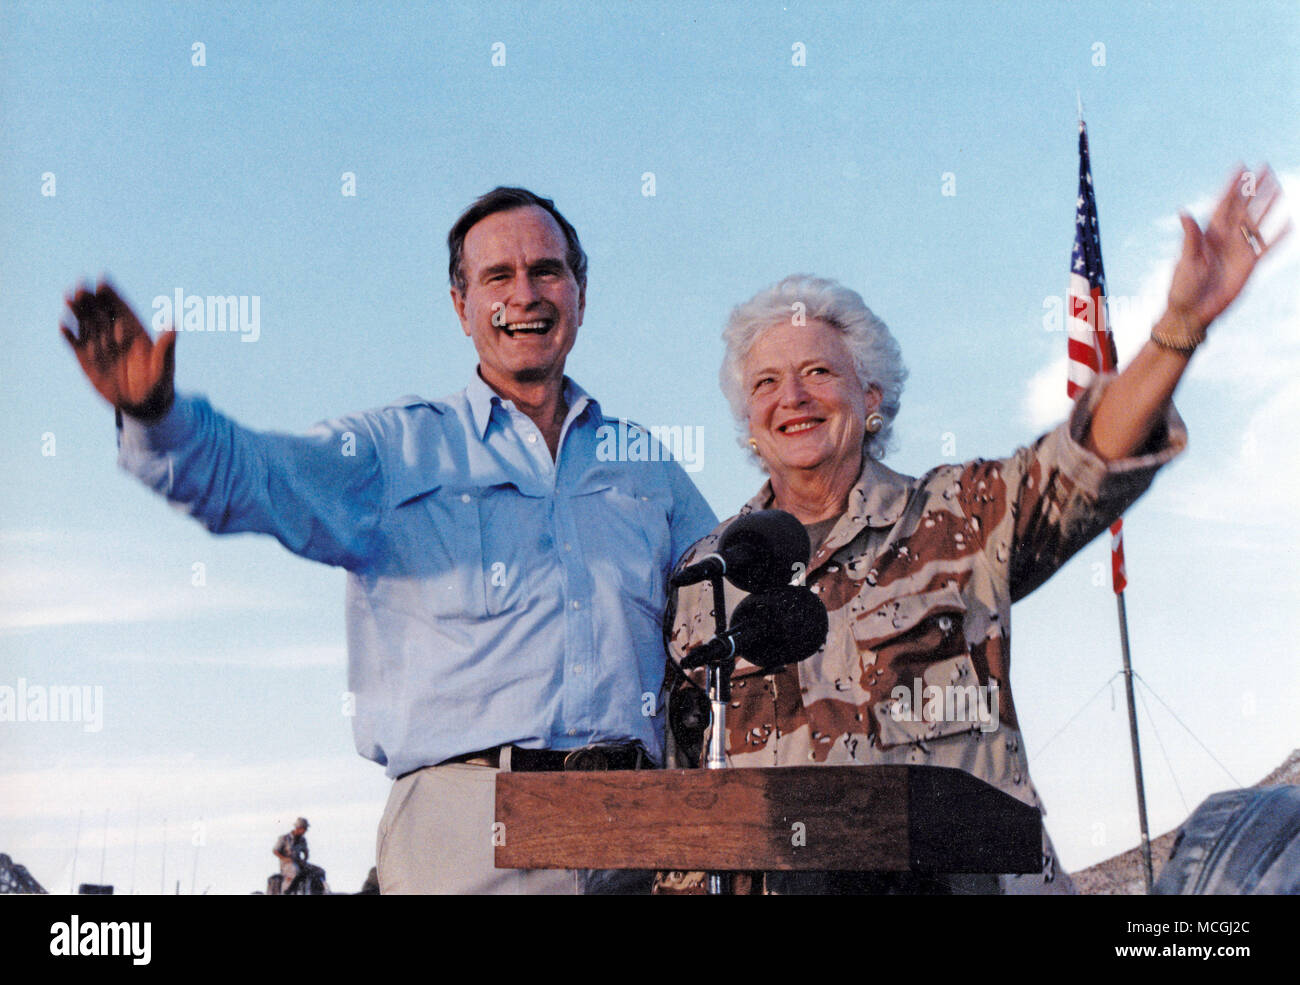 April 16, 2018 - (File Photo) - Former first lady Barbara Bush was reported in failing health and has decided not to seek further medical treatment, a family spokesman says. PICTURED: January 22, 1990 - Saudi Arabia - United States President GEORGE H.W. BUSH and first lady BARBARA BUSH visit US military personnel on Thanksgiving in Saudi Arabia on November 22, 1990. Credit: Ed Bailey/DOD/CNP/ZUMA Wire/Alamy Live News Stock Photo